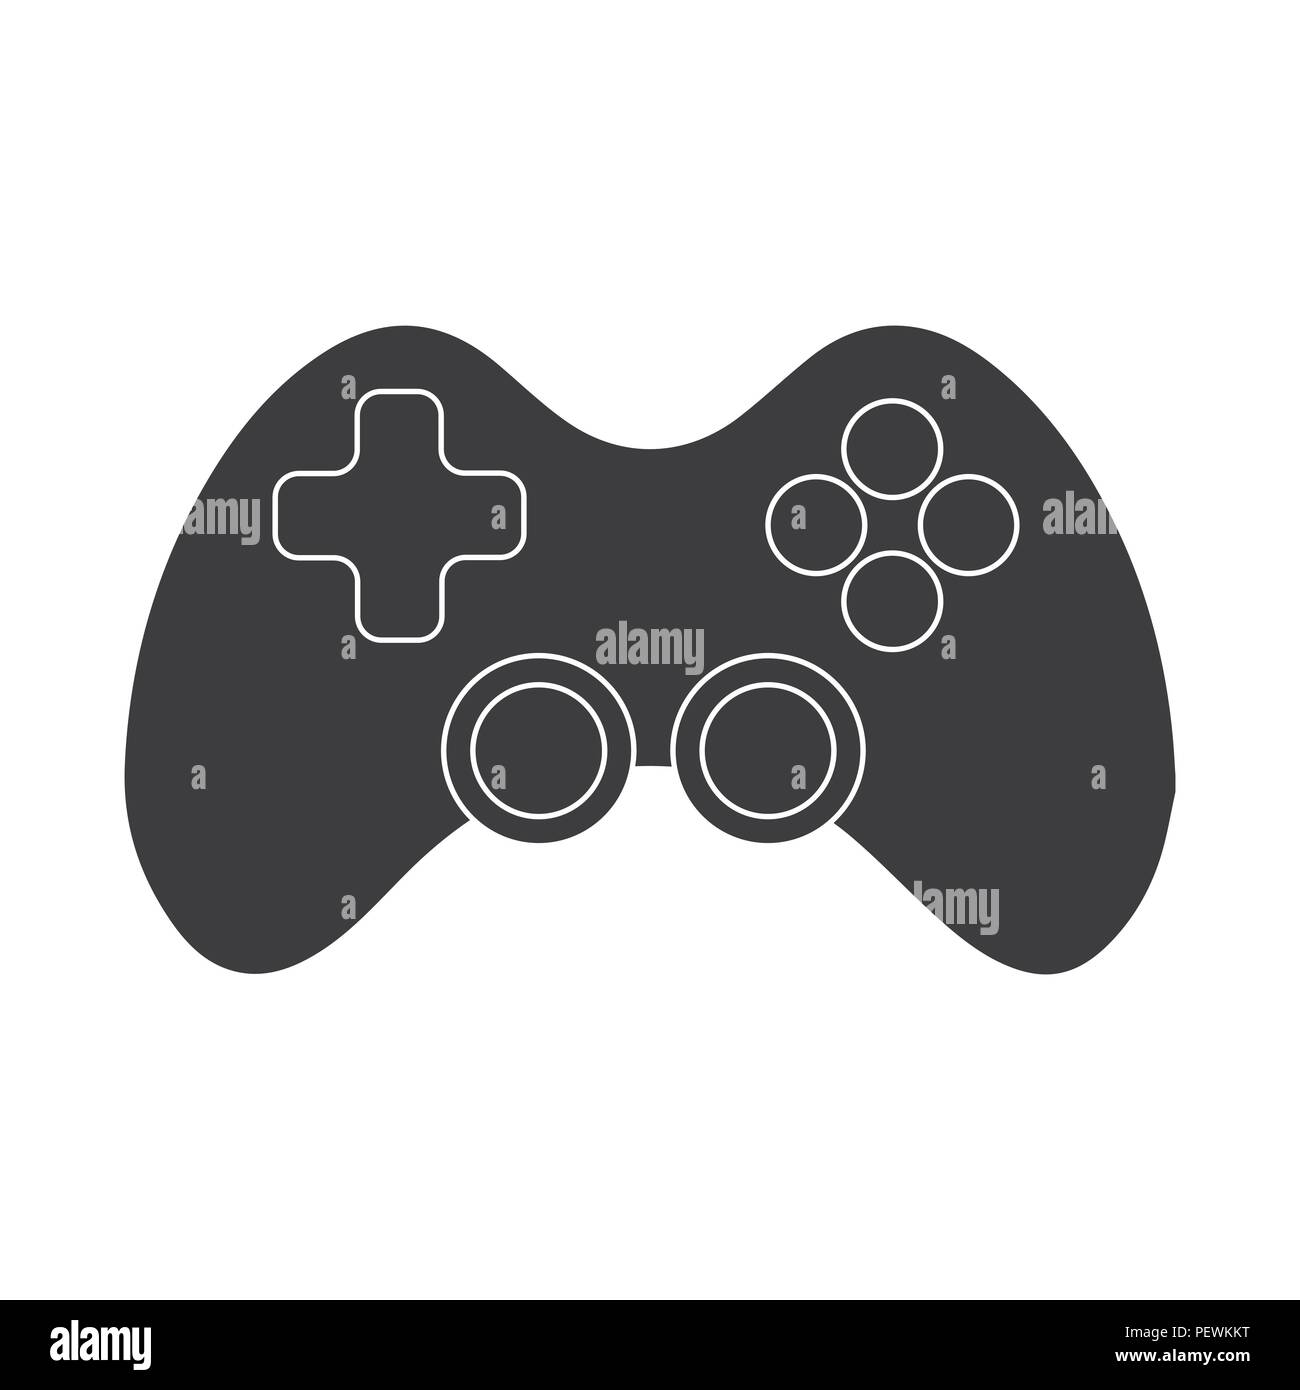 app,background ,black,blue,button,child,computer,concept,console,controller,design,element,entertainment, game,gamepad,gamer,gaming,gift,gray,icon,illustration,isolated,joystick,keypad,logo,long,play,shadow,sign,symbol,technology,toy,vector,video,web  ...